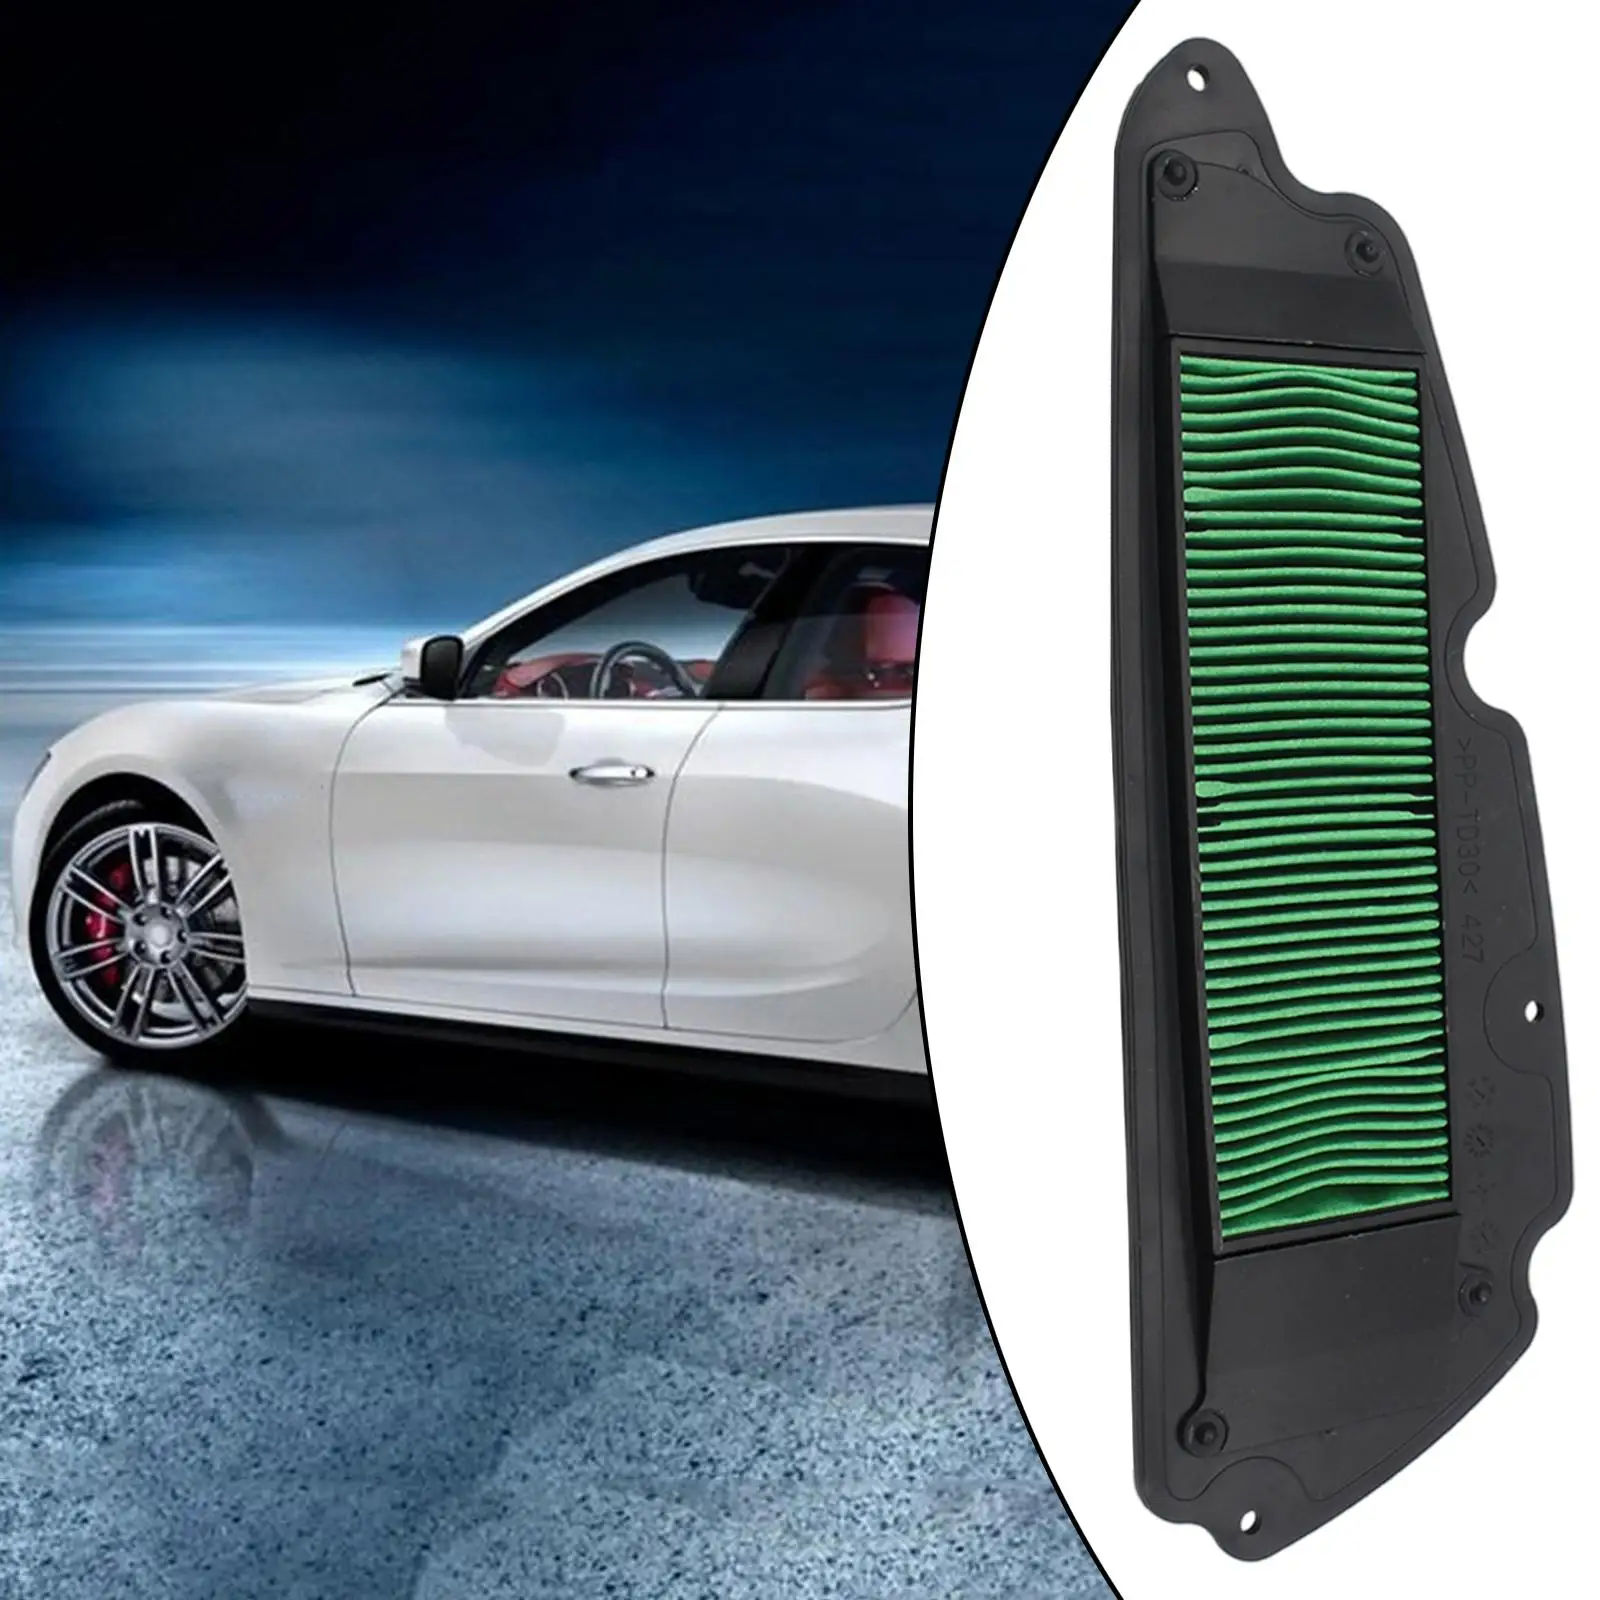  Air Filter Cleaner Compatible High Performanc for SH350i